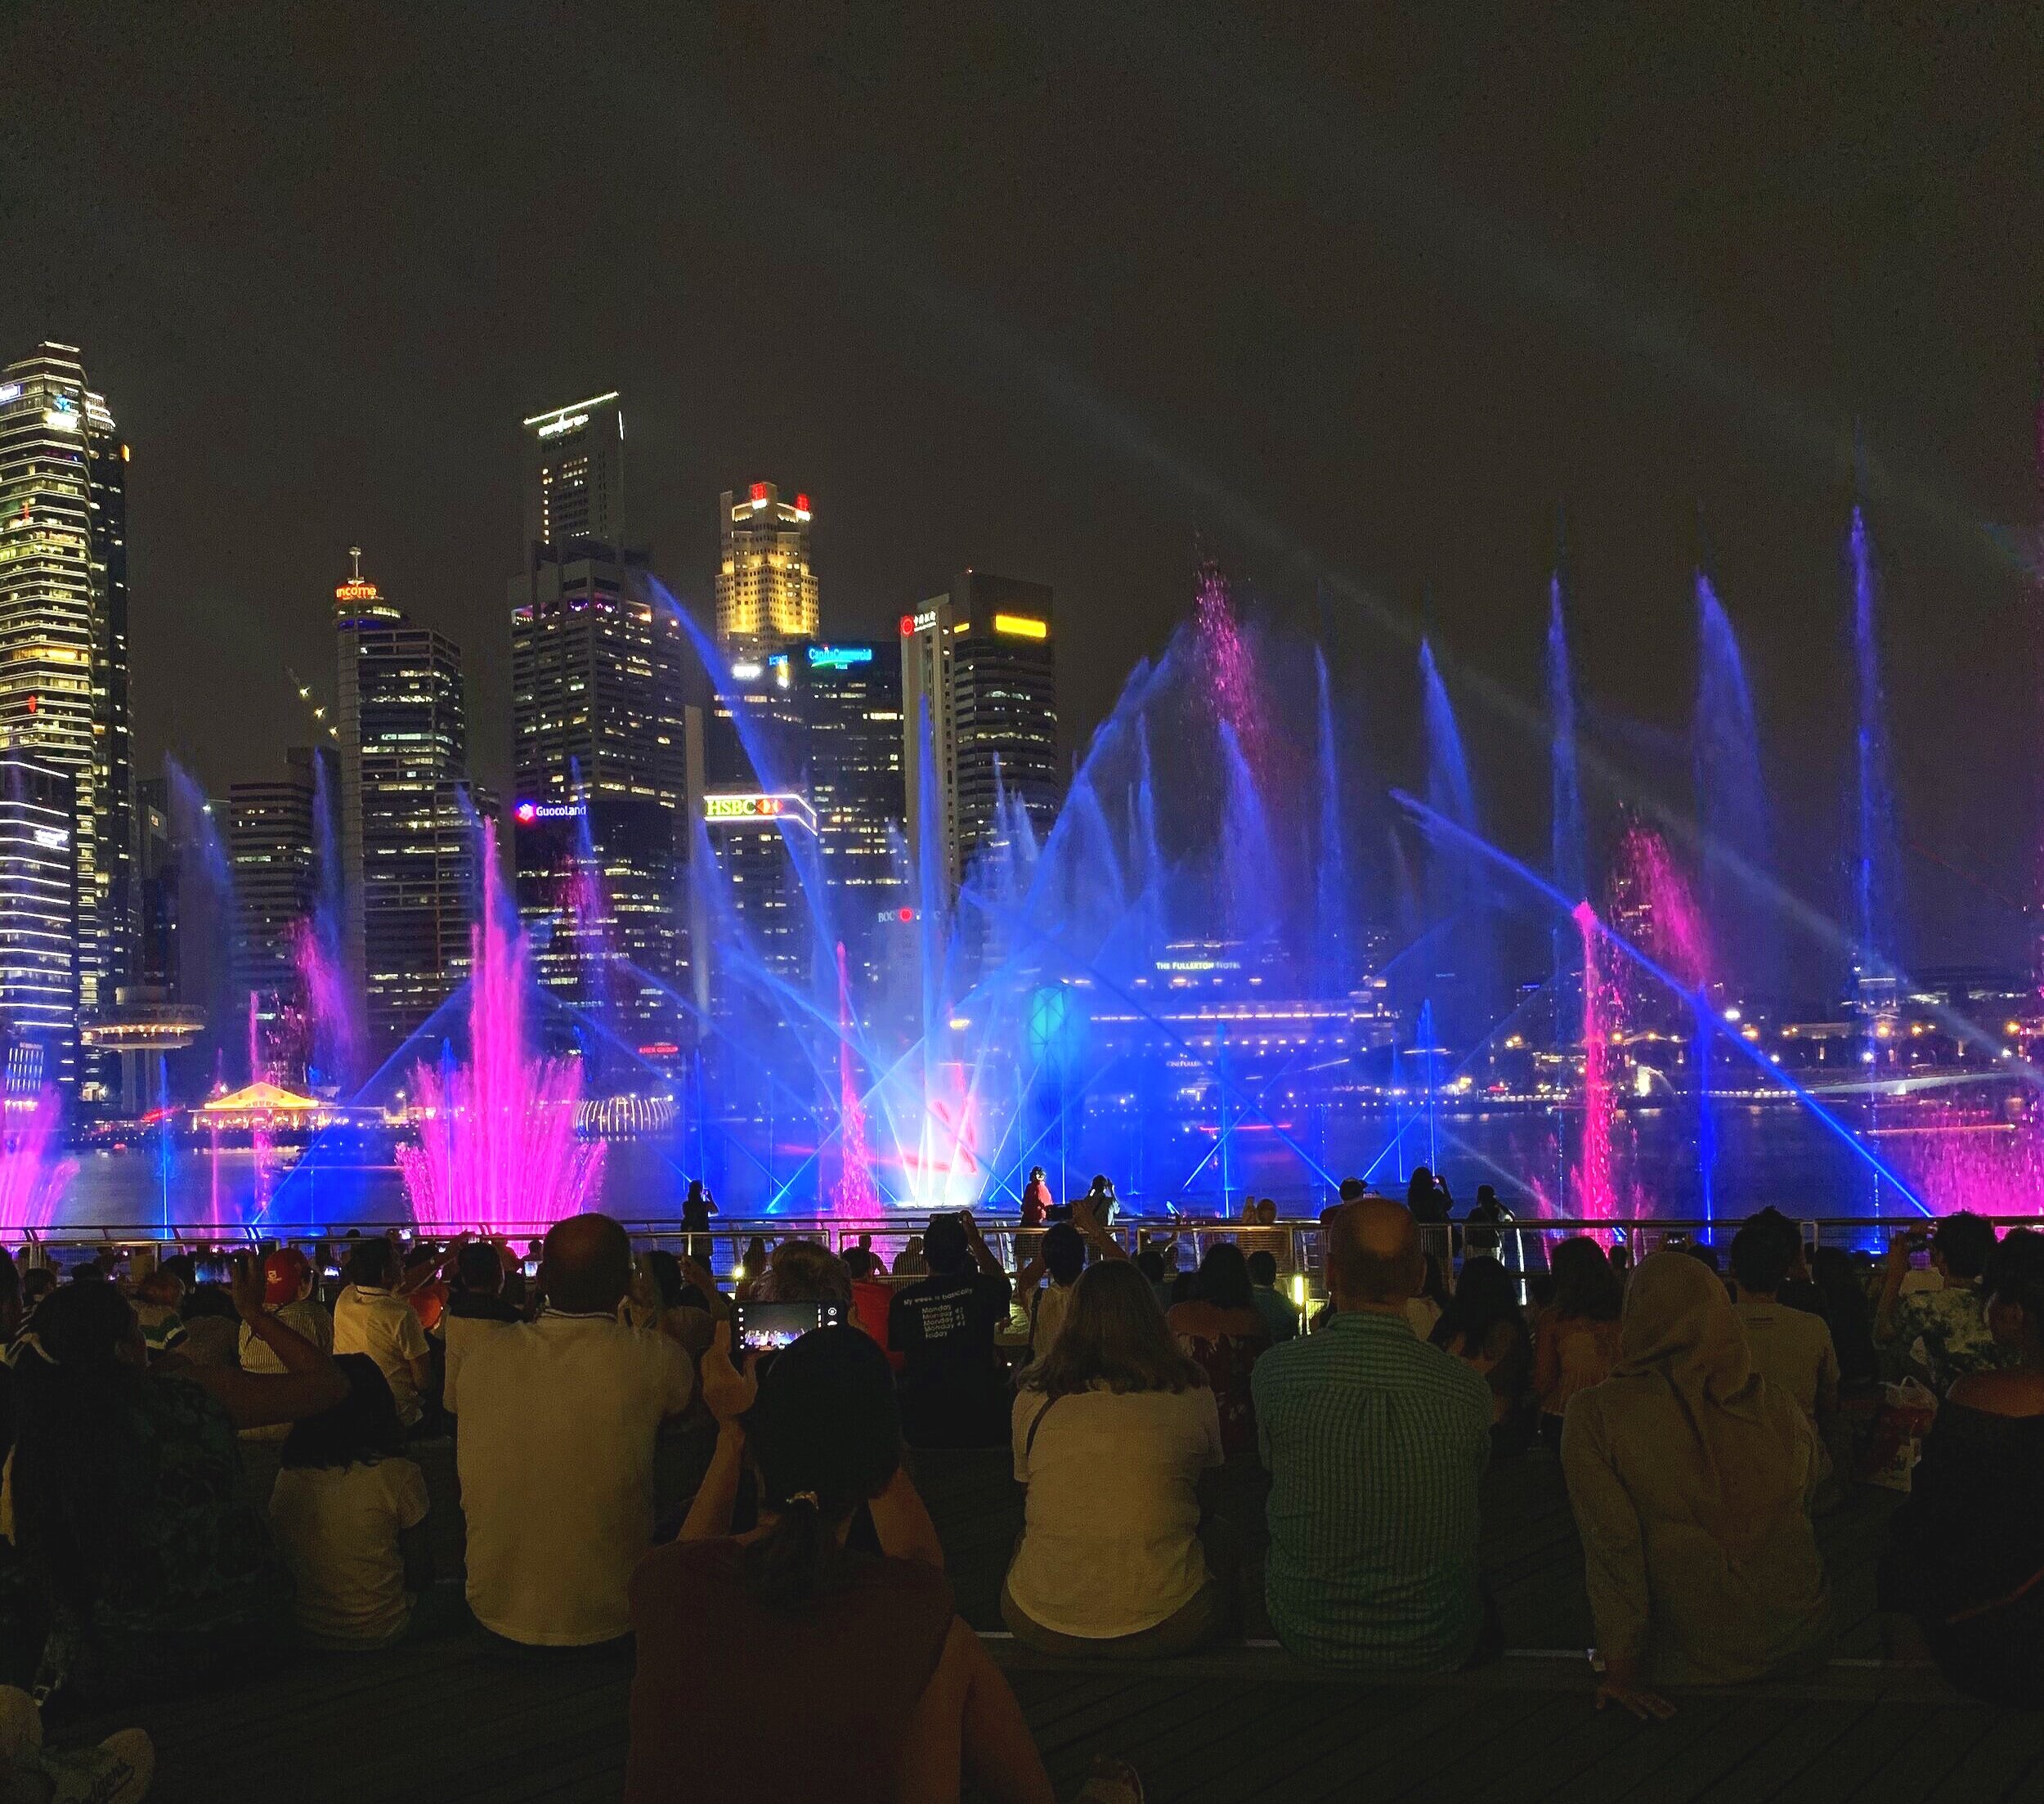 Te incredible Spectra laser and water show